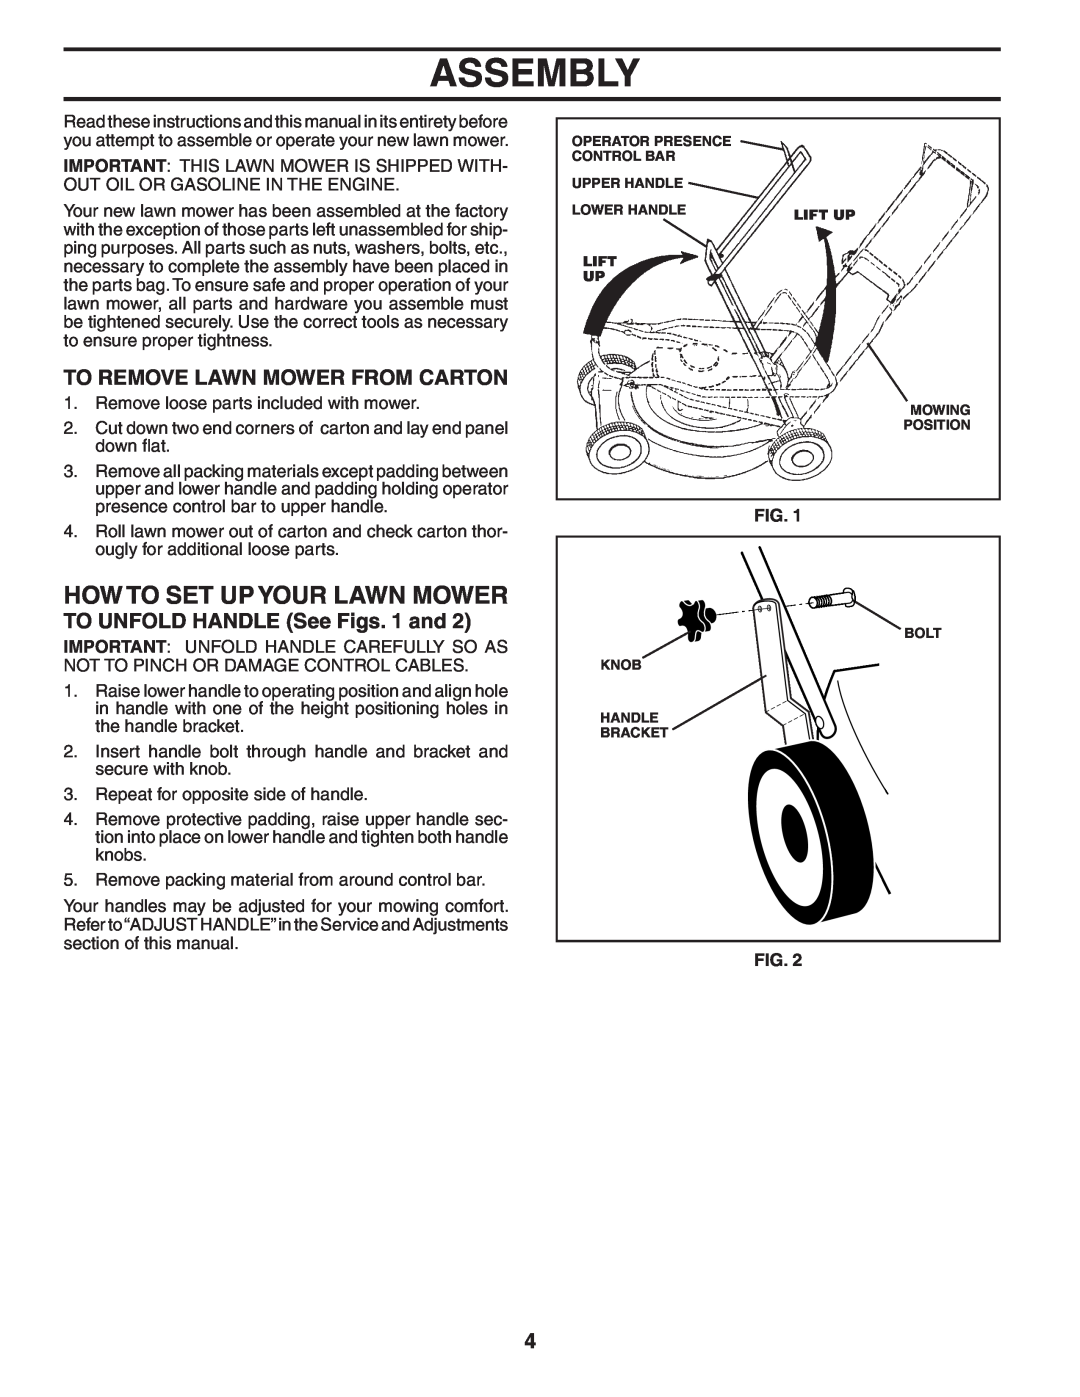 Husqvarna 65RSW21HV owner manual Assembly, How To Set Up Your Lawn Mower, To Remove Lawn Mower From Carton 